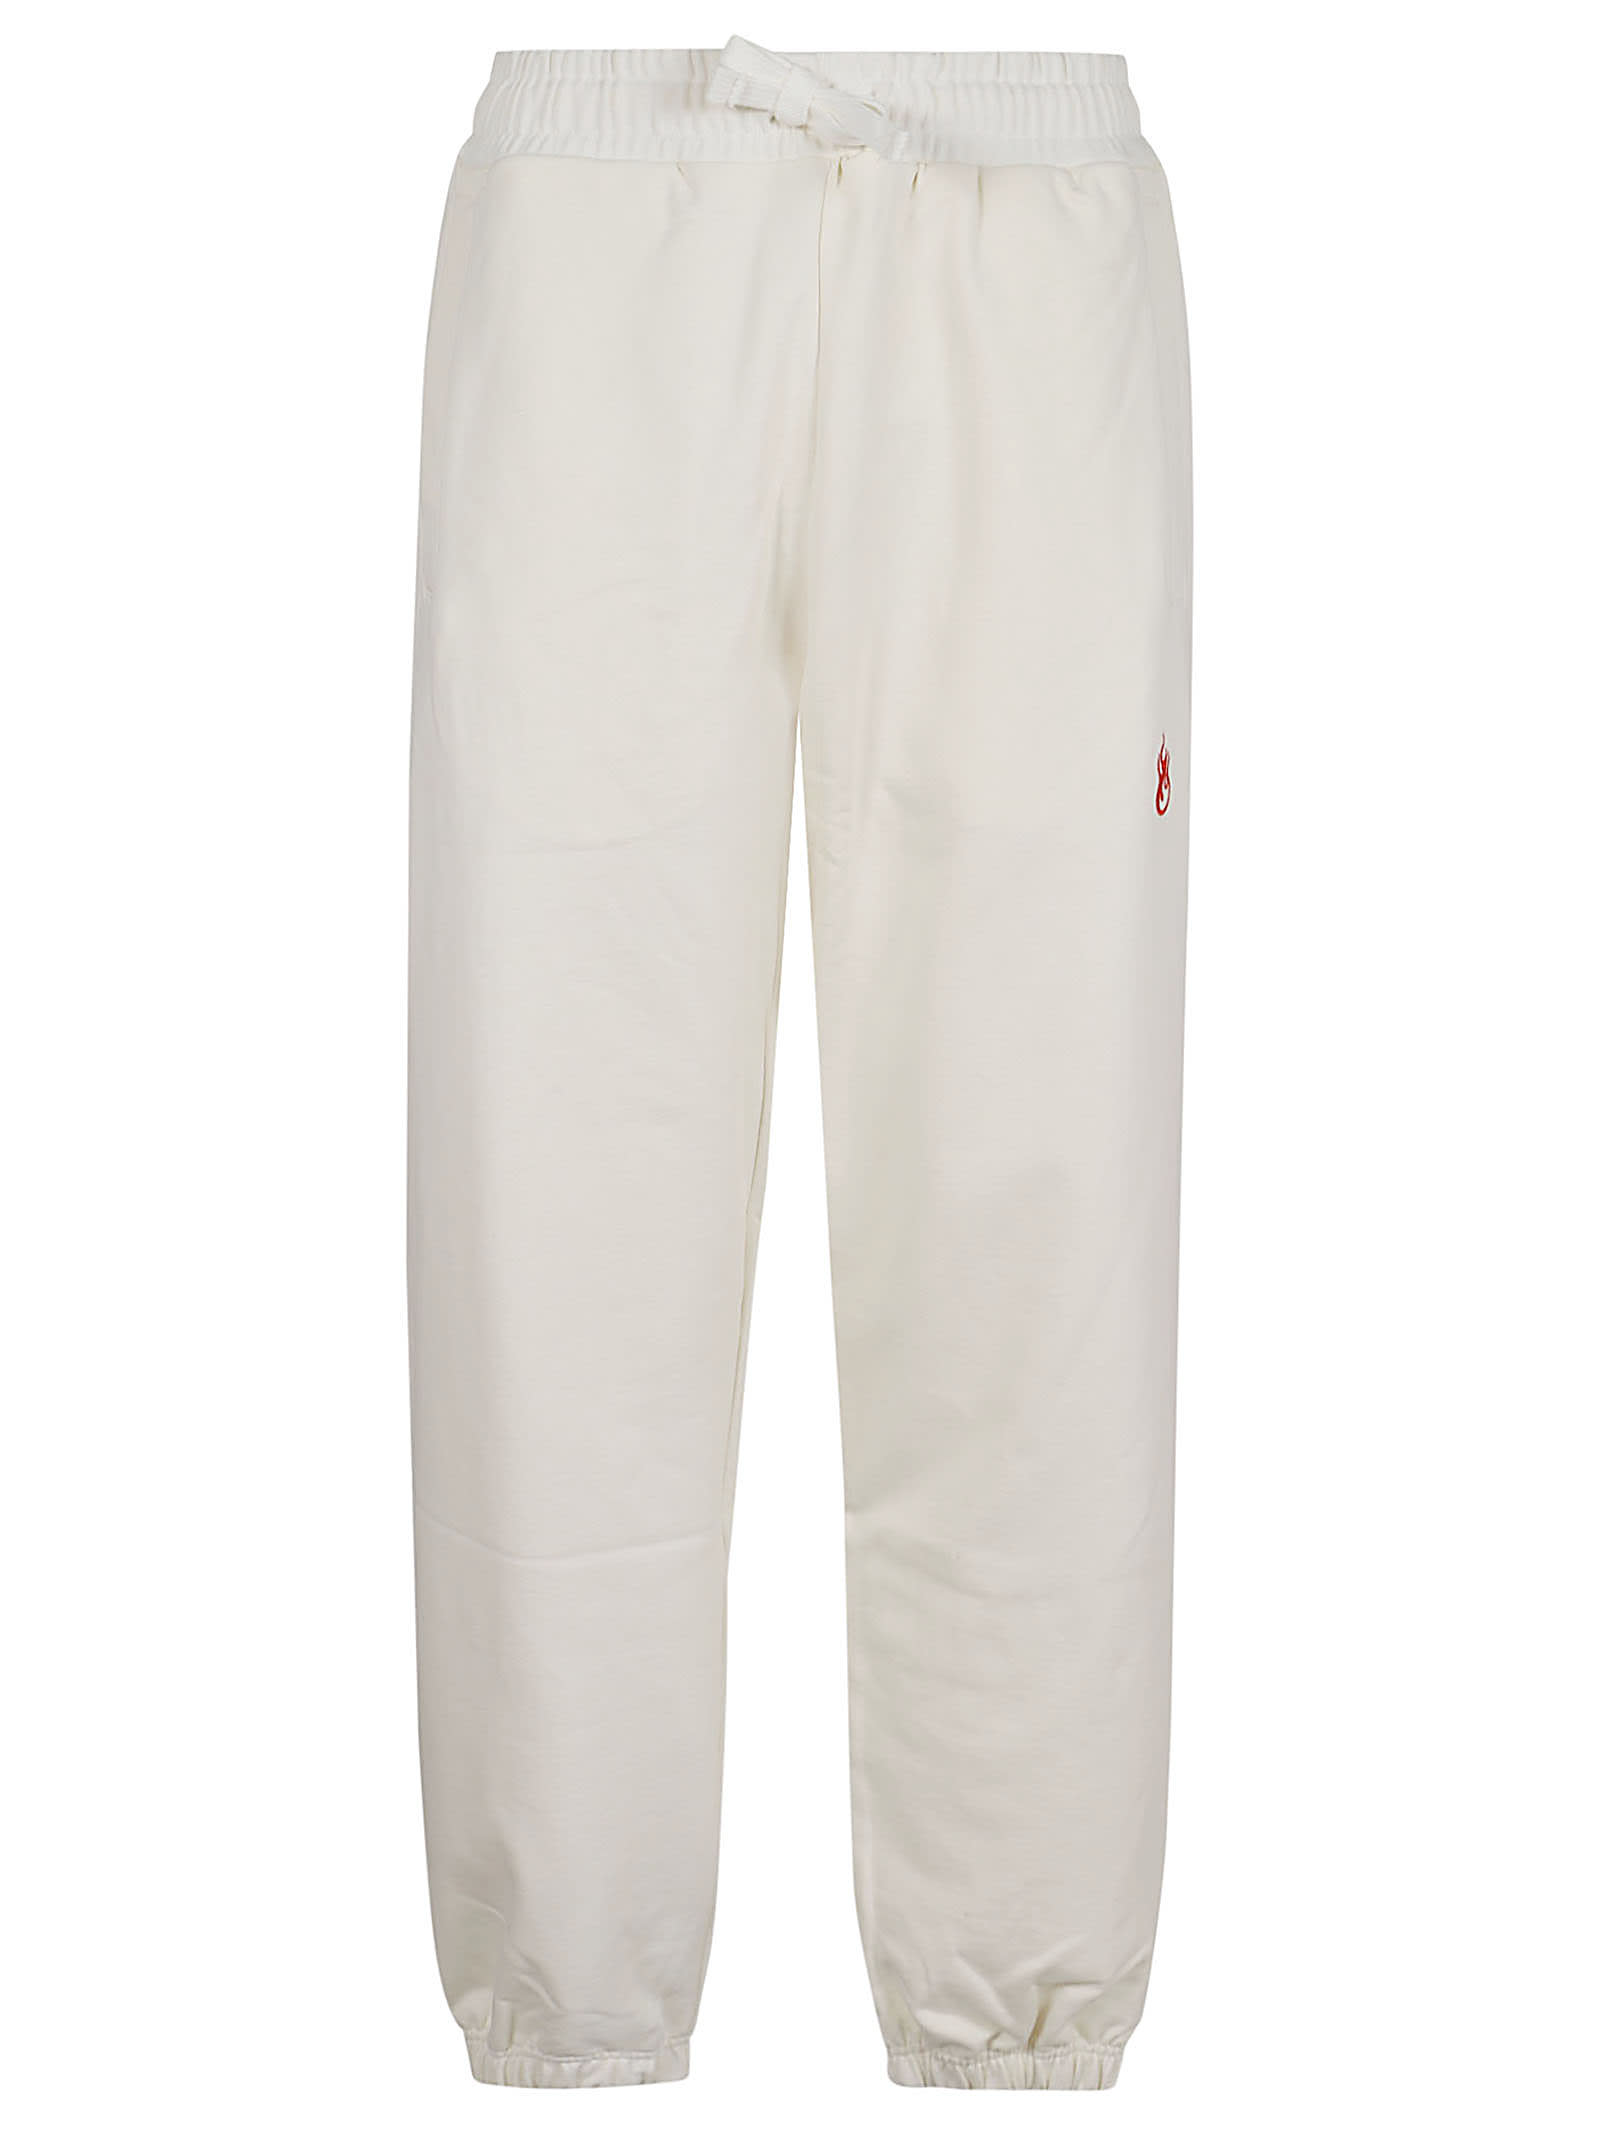 White Pants With Flames Logo And Metal Label